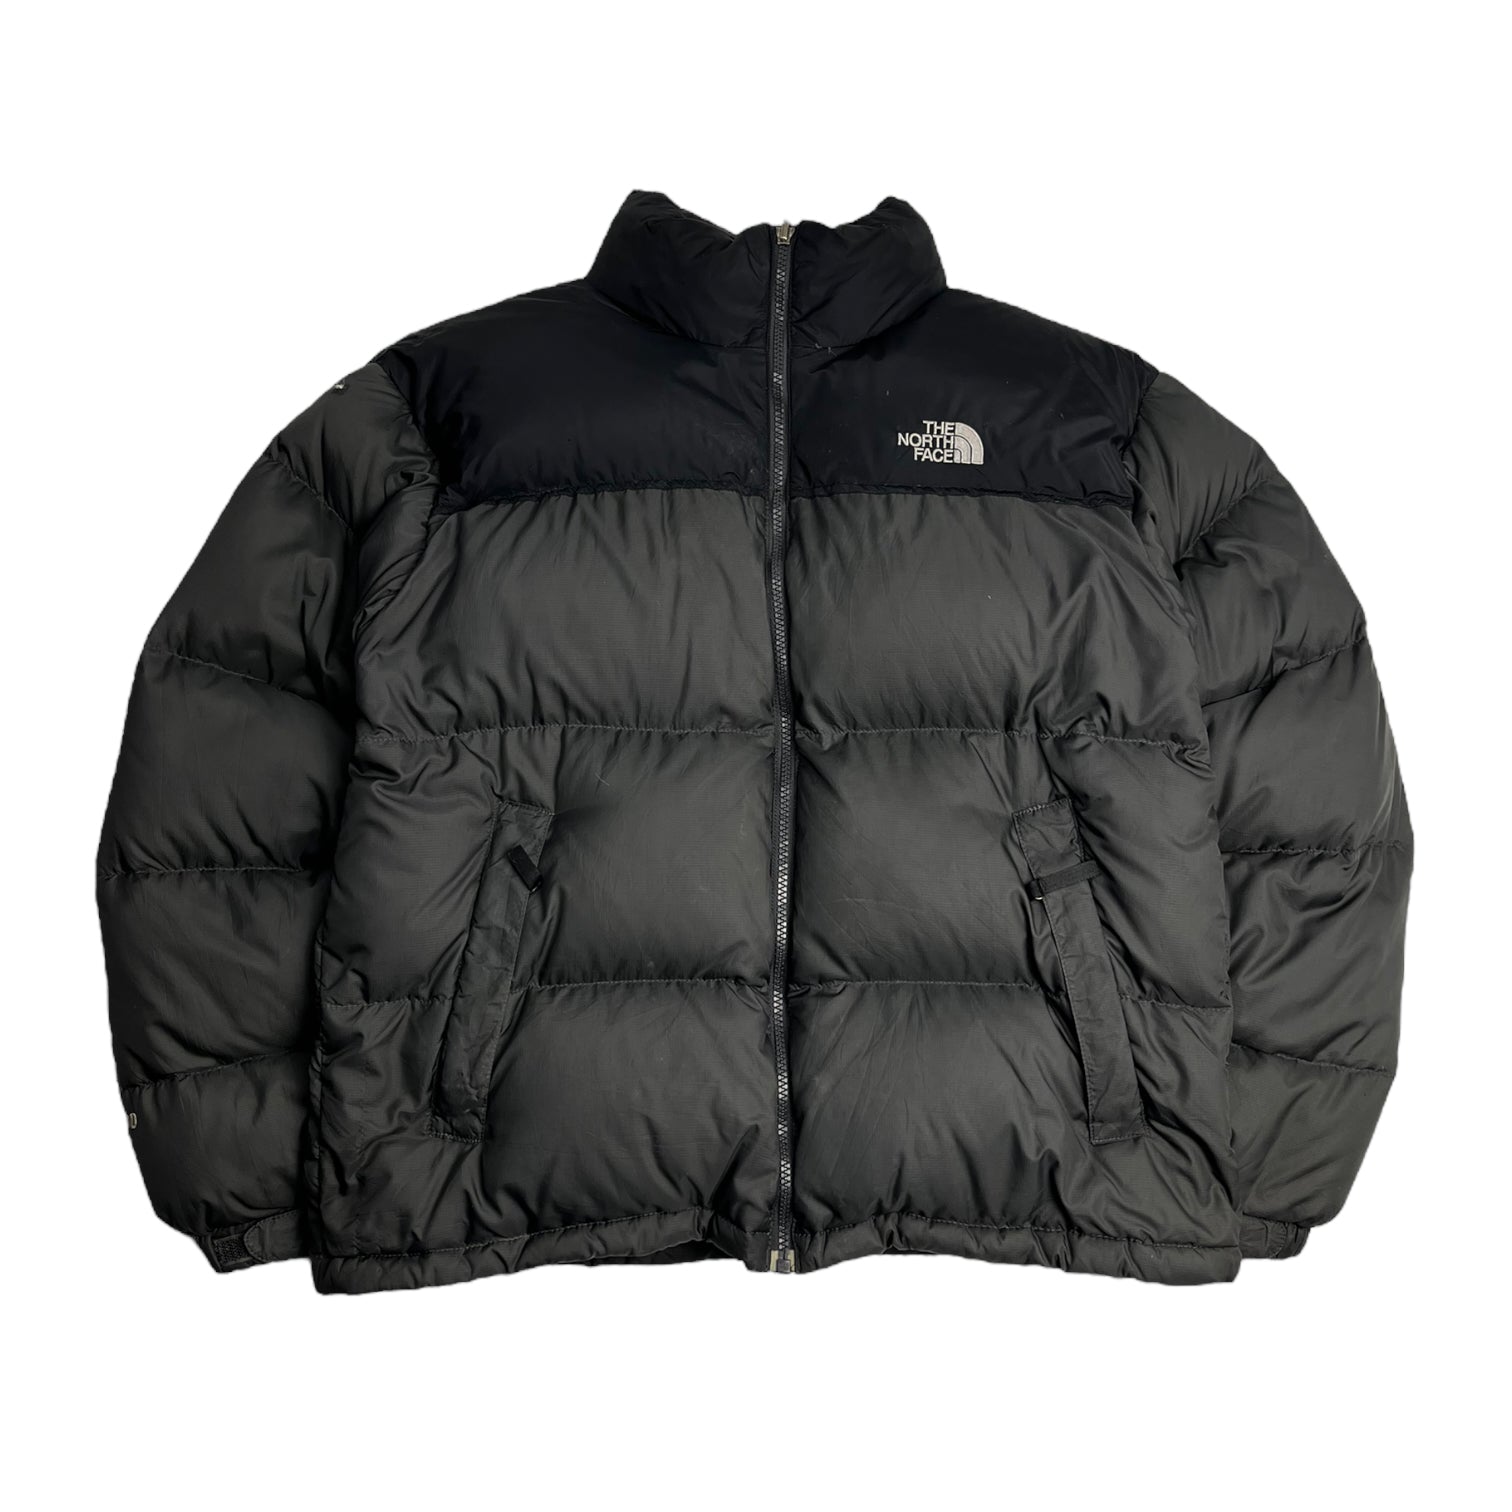 The North Face 700 Puffer Jacket Deep Slate Grey